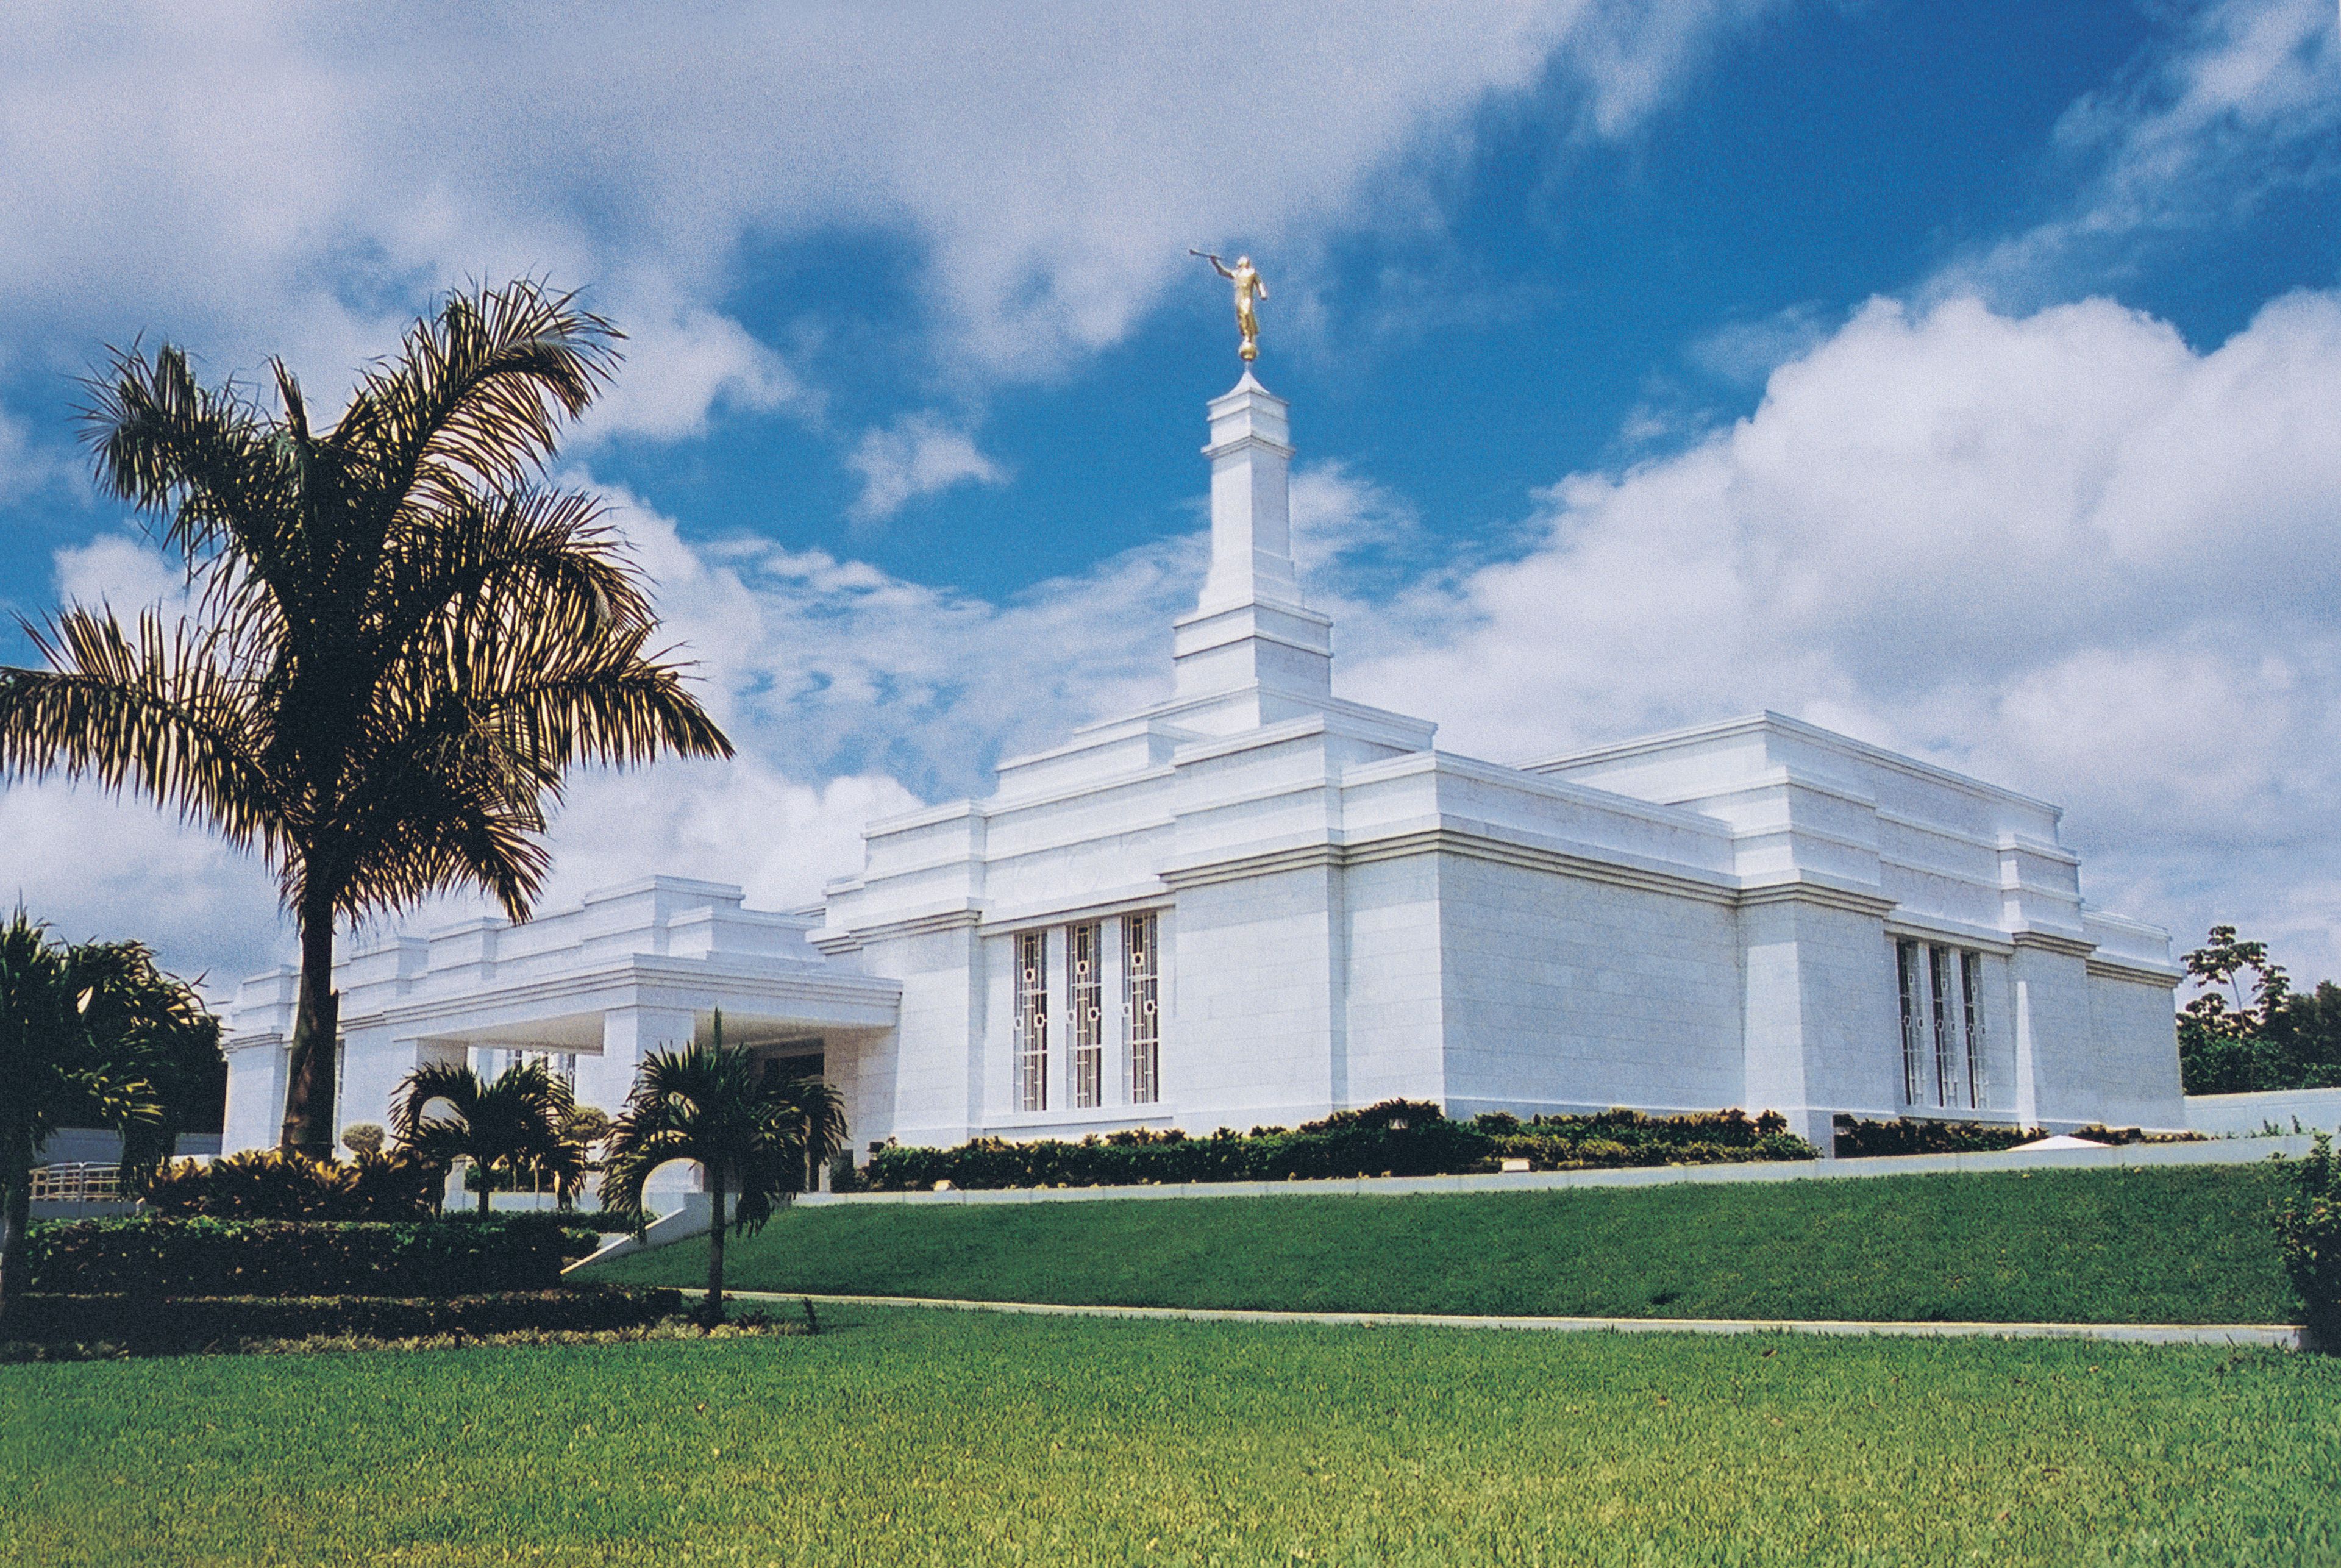 The Villahermosa Mexico Temple, with a large palm tree growing on the grounds.